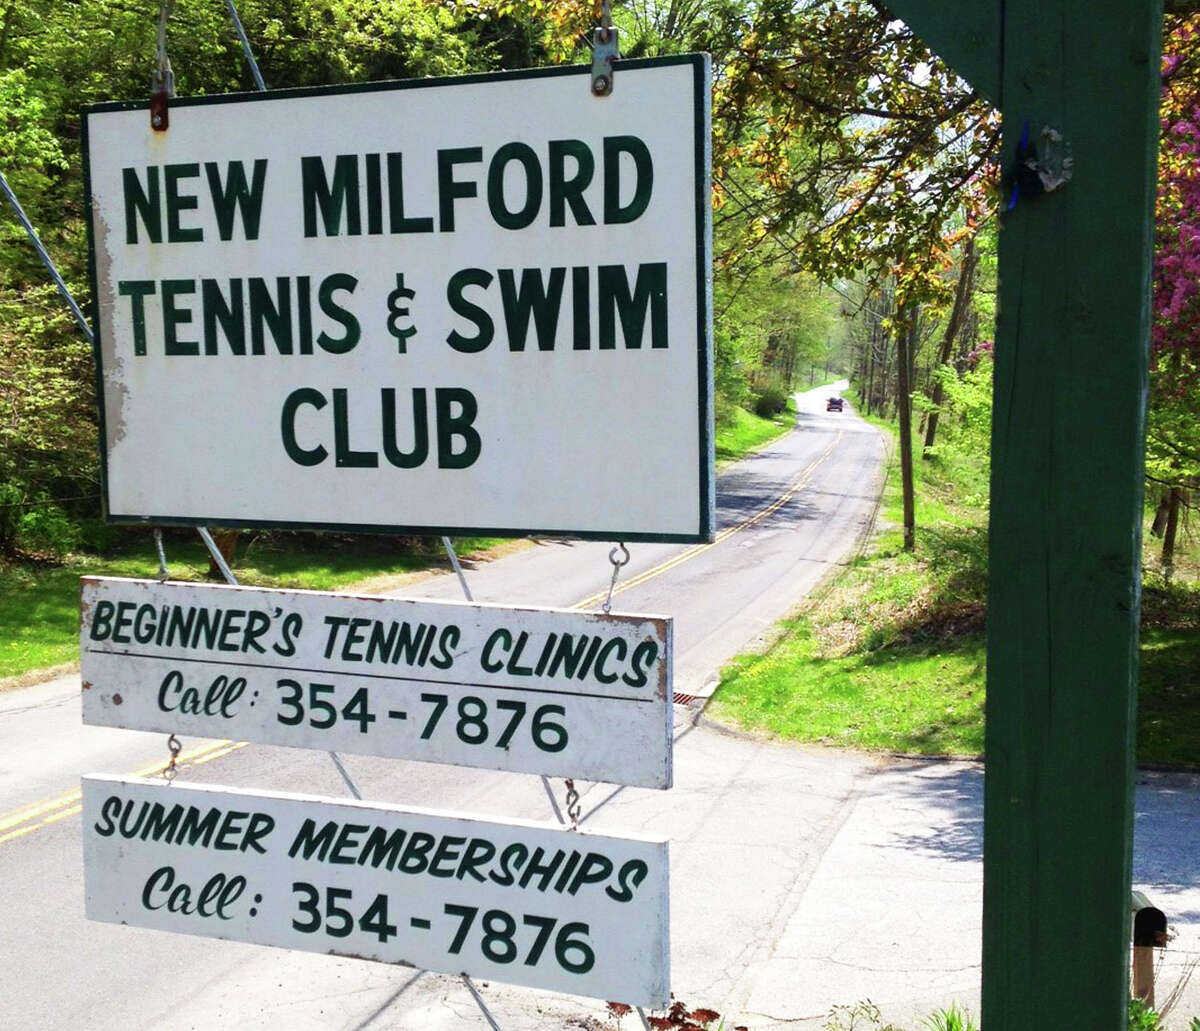 The New Milford Tennis & Swim Club, located along Aspetuck Ridge Road in New Milford, is celebrating its 50th anniversary in 2015. May 2015